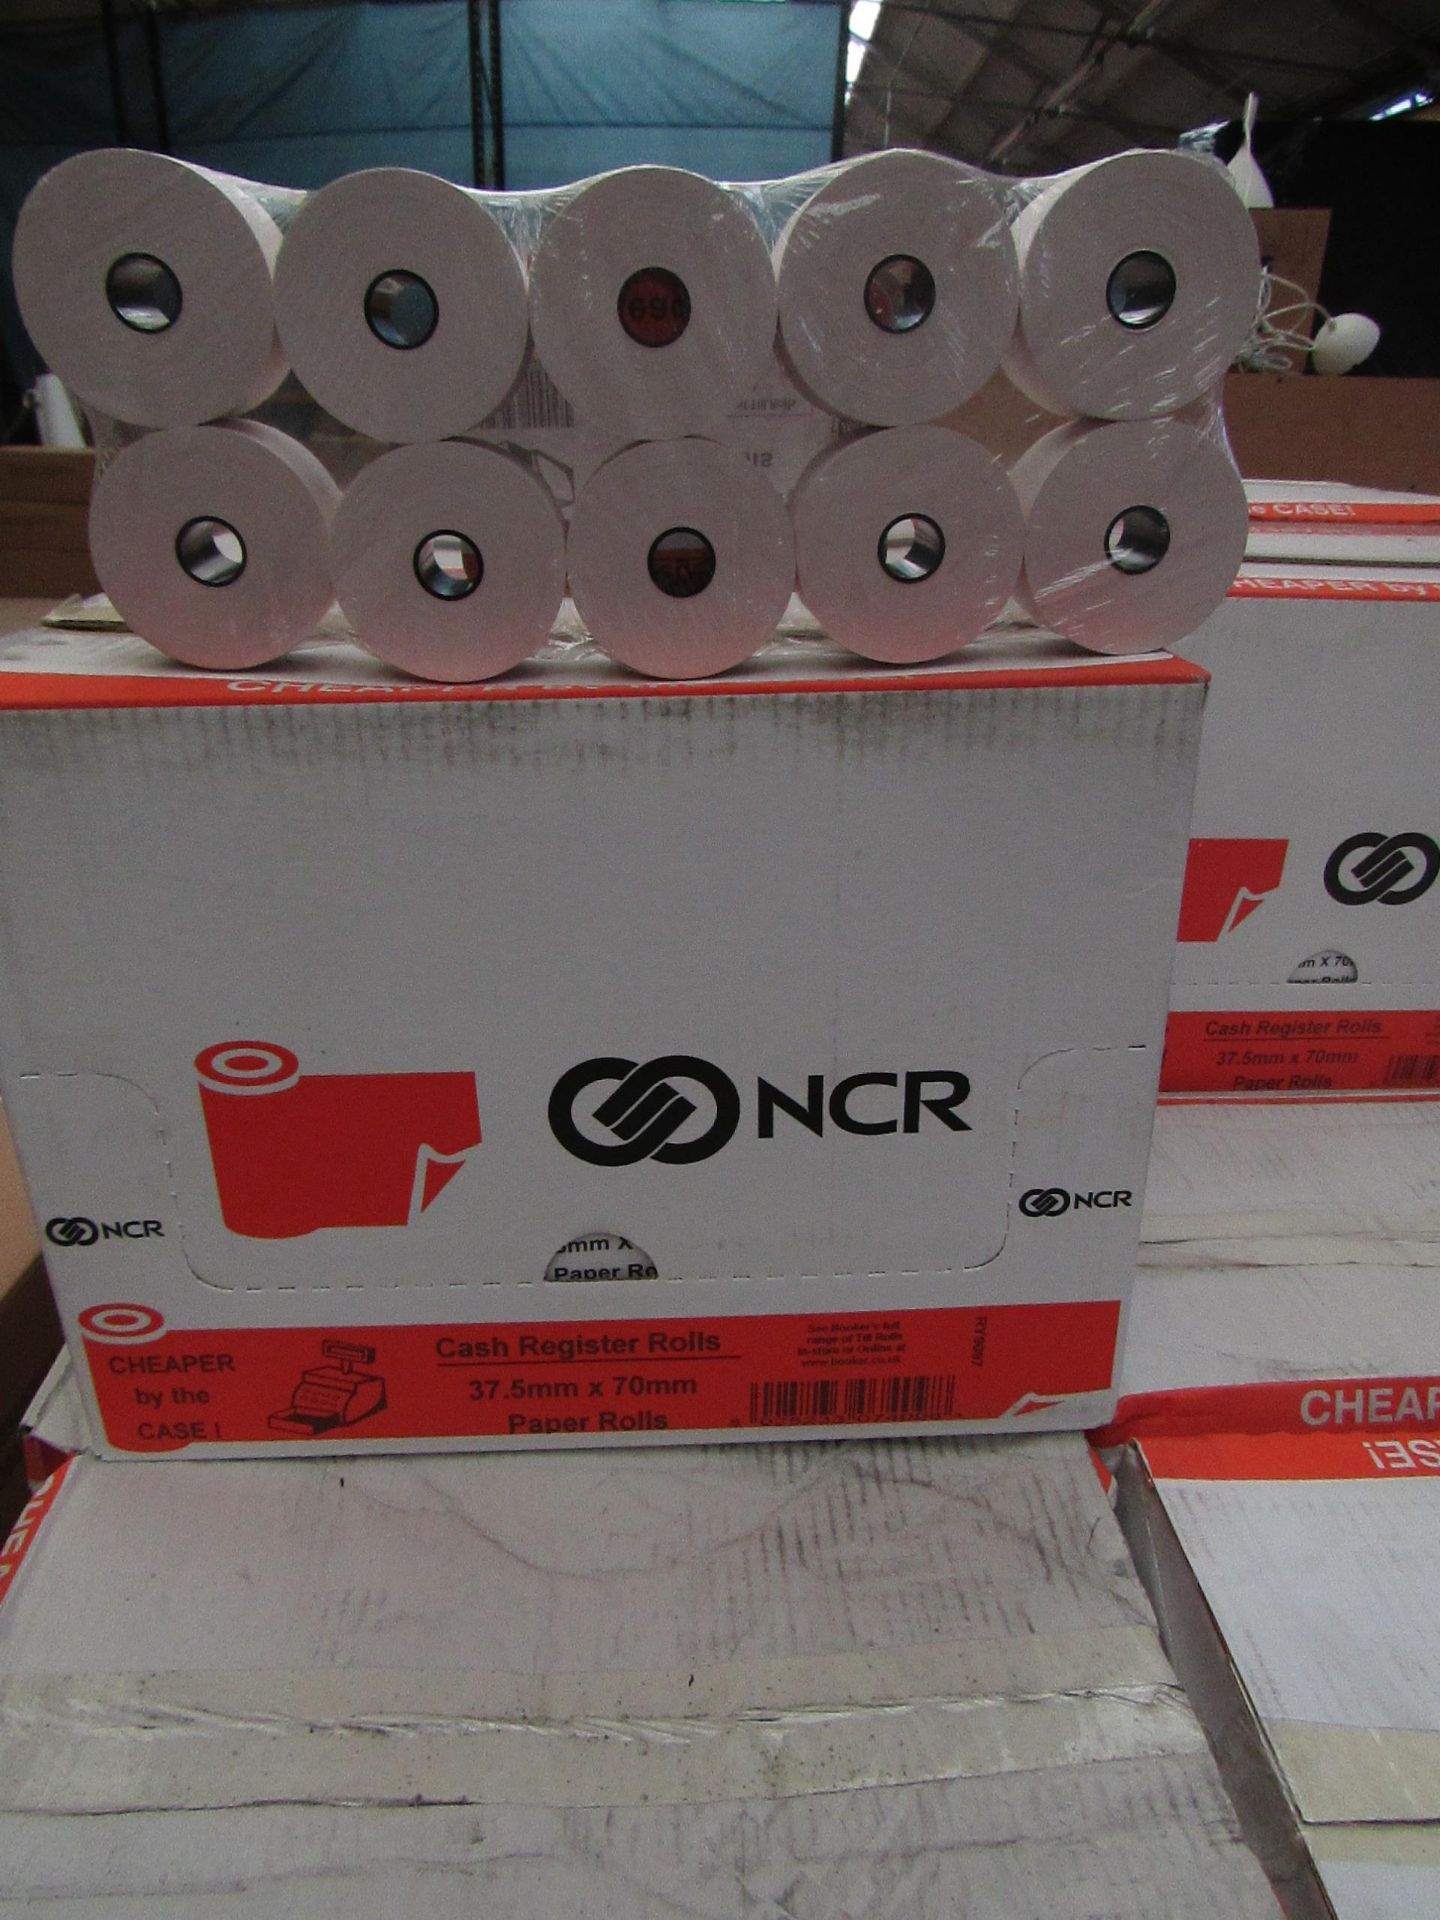 120 x NCR Cash Register Roll 37.5mm x 70mm Paper Rolls RY9097 new & boxed - Image 2 of 2